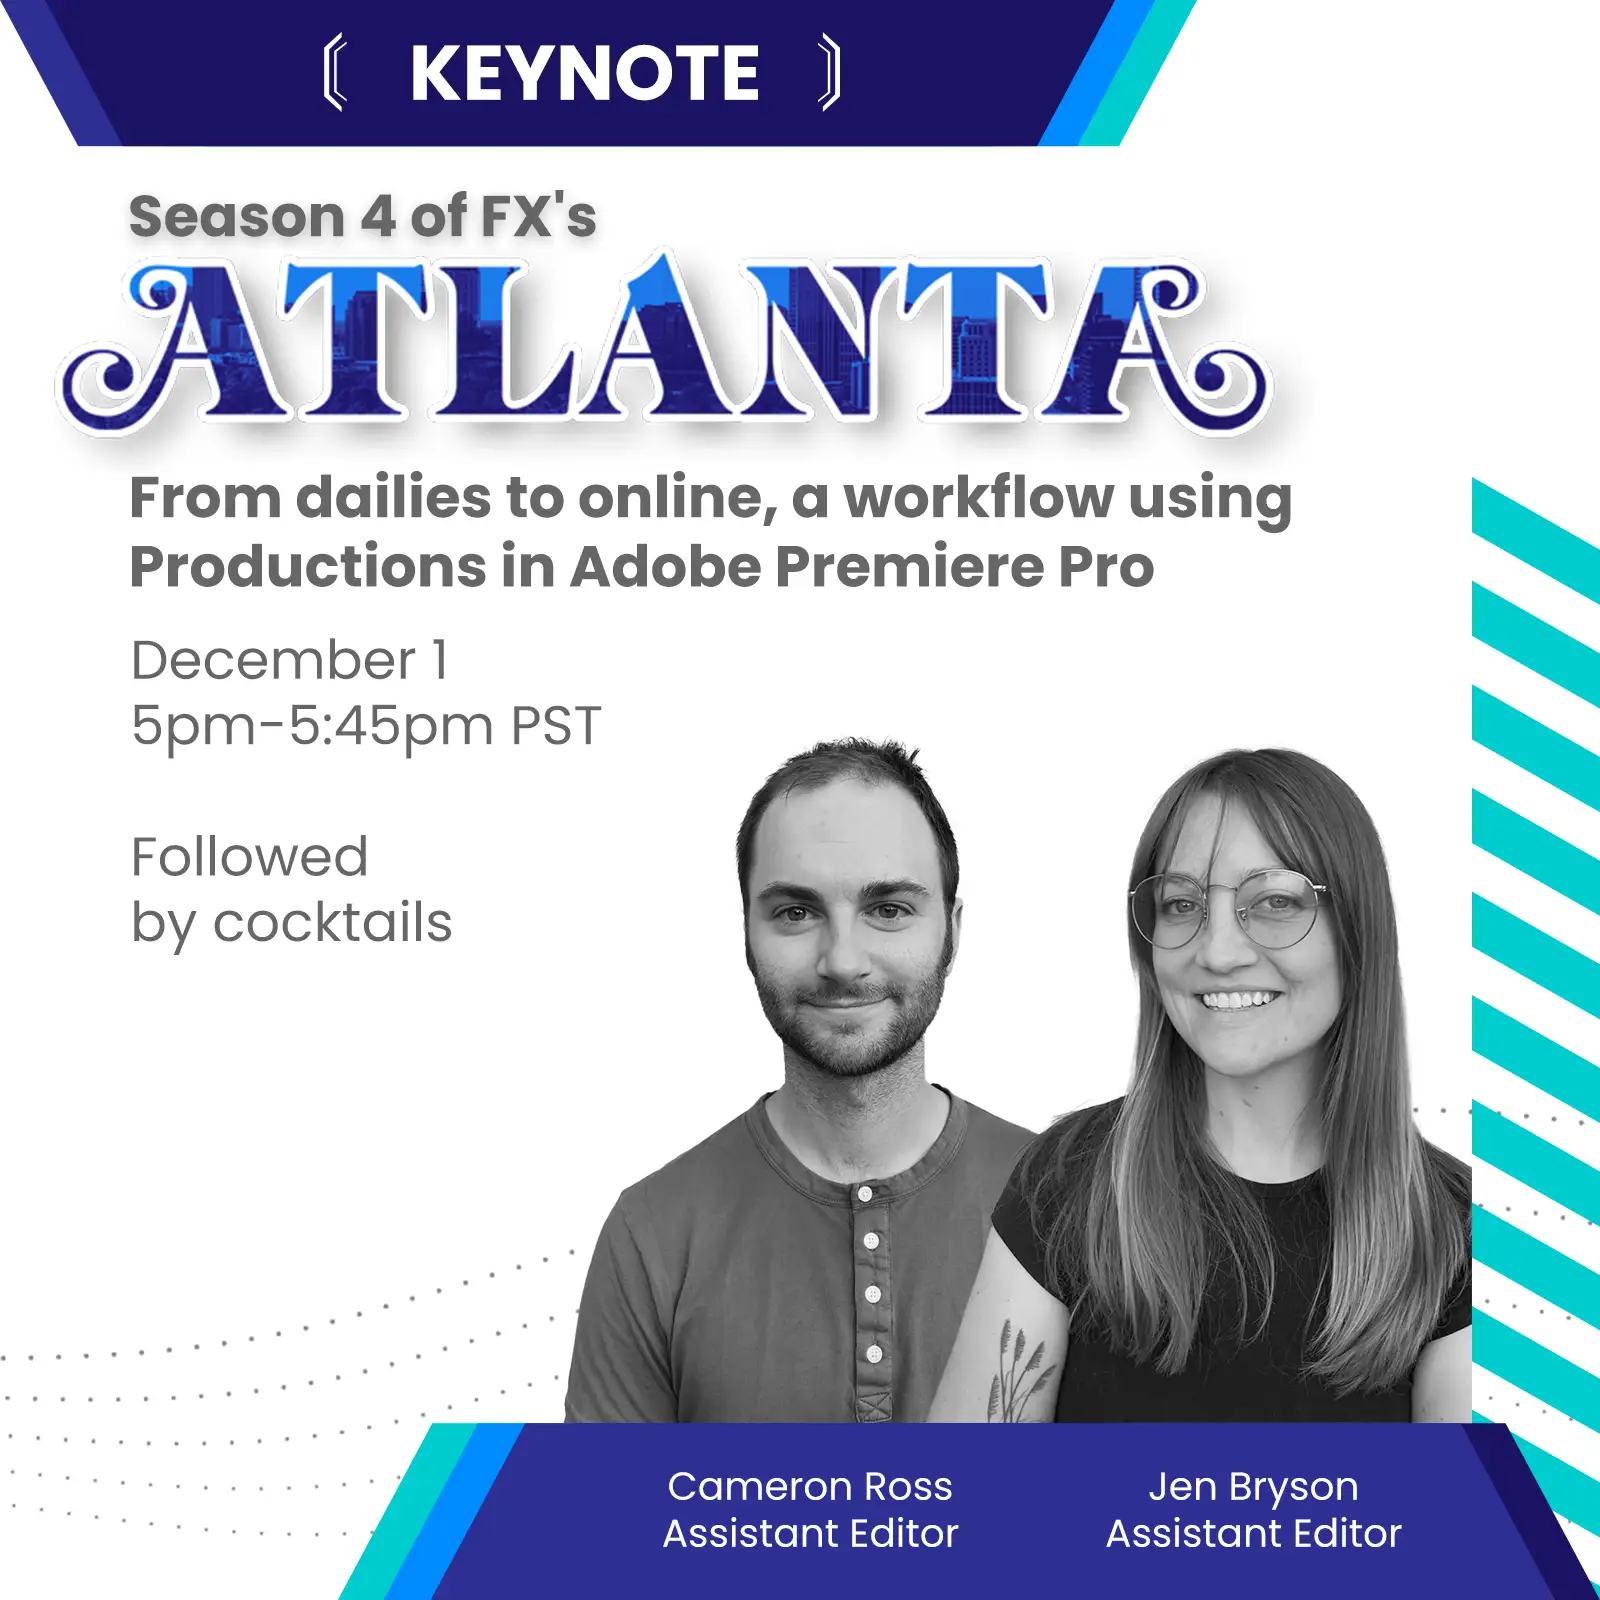 Keynote Speakers - Cameron Ross, Assistant Editor and Jen Bryson, Assistant Editor from FX's Atlanta